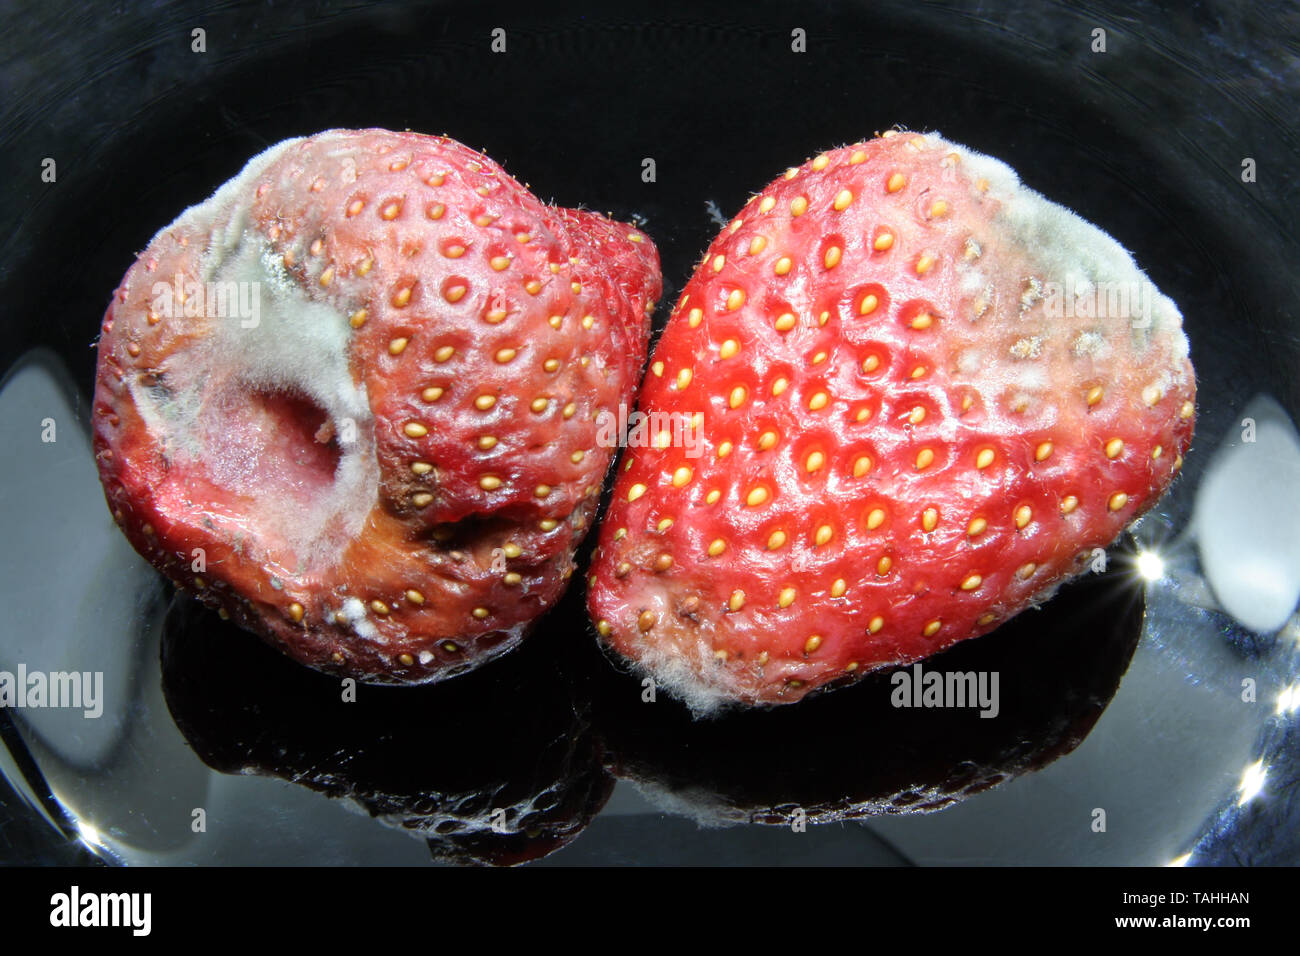 Strawberries with mold. Bad fruit. Bad strawberries. Stock Photo